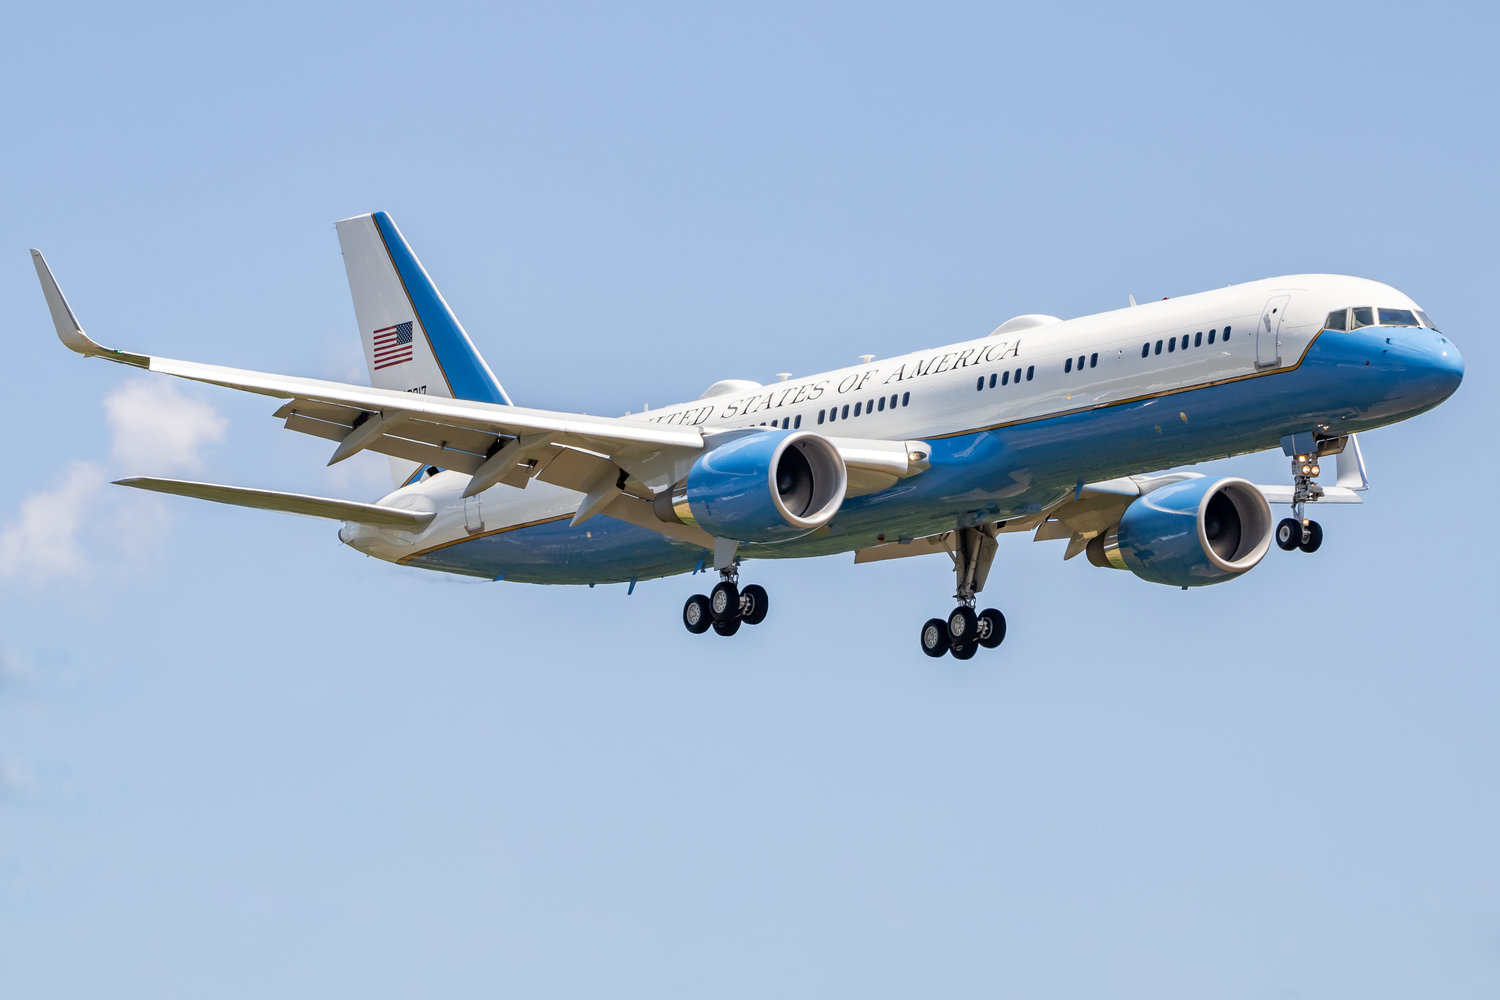 Photo of the president's plane by young photographer Jake Fernandes.